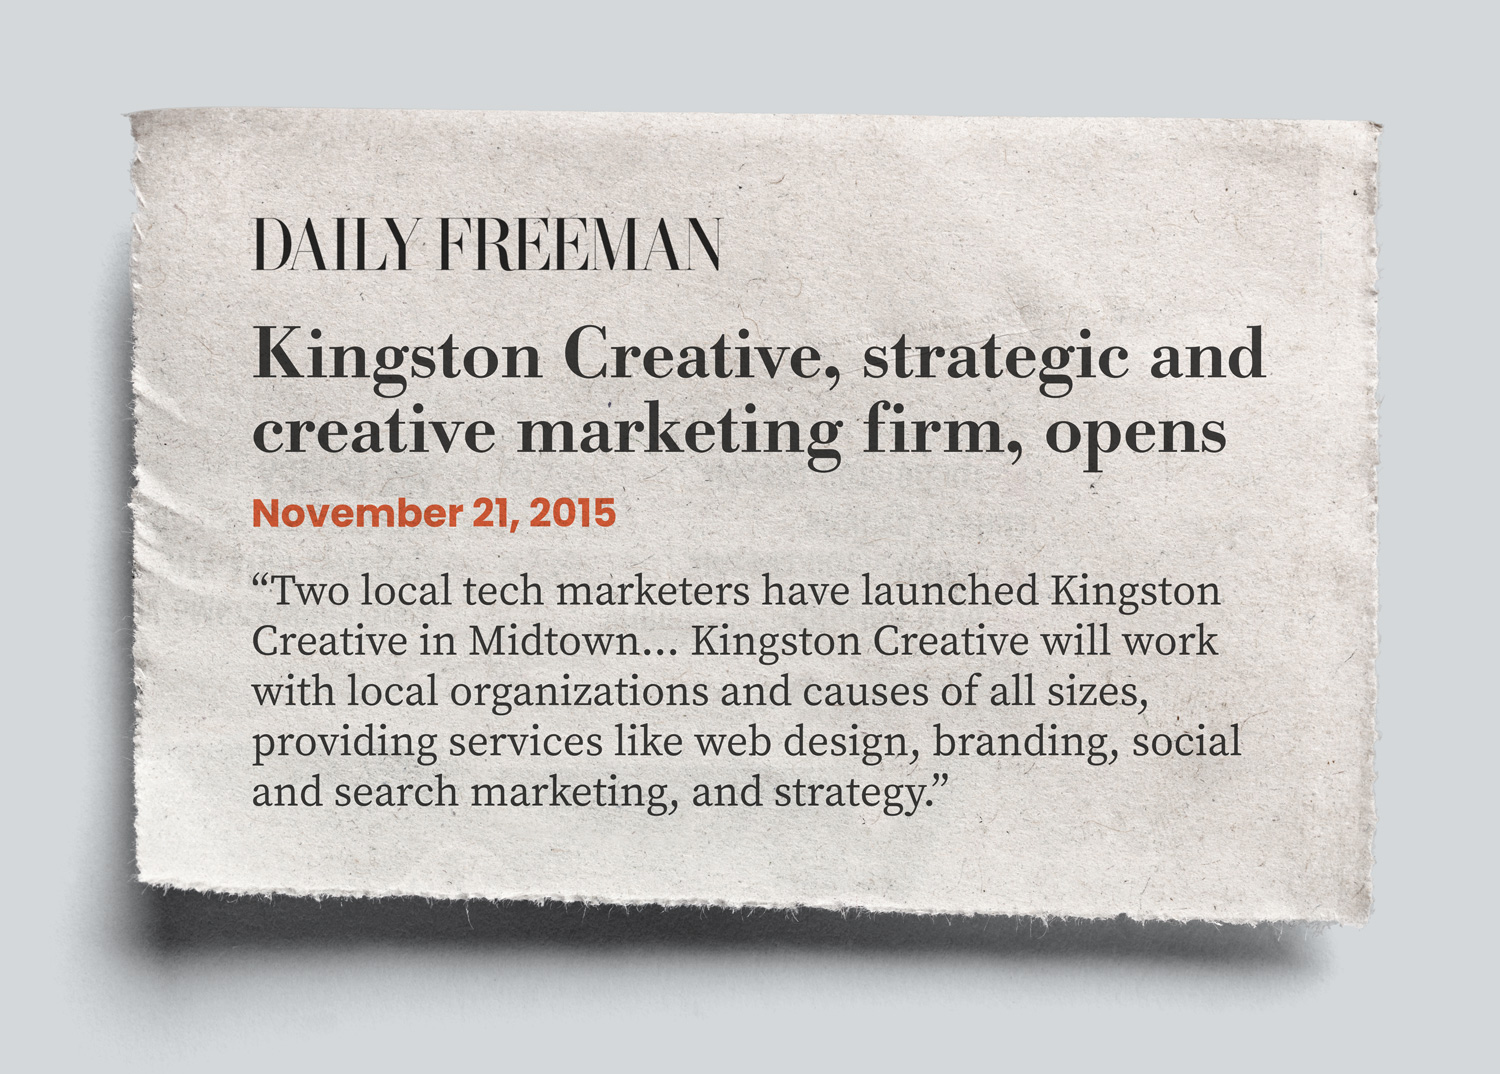 daily freeman Kingston Creative, strategic and creative marketing firm, opens November 21, 2015 Two local tech marketers have launched Kingston Creative in Midtown… Kingston Creative will work with local organizations and causes of all sizes, providing services like web design, branding, social and search marketing, and strategy.